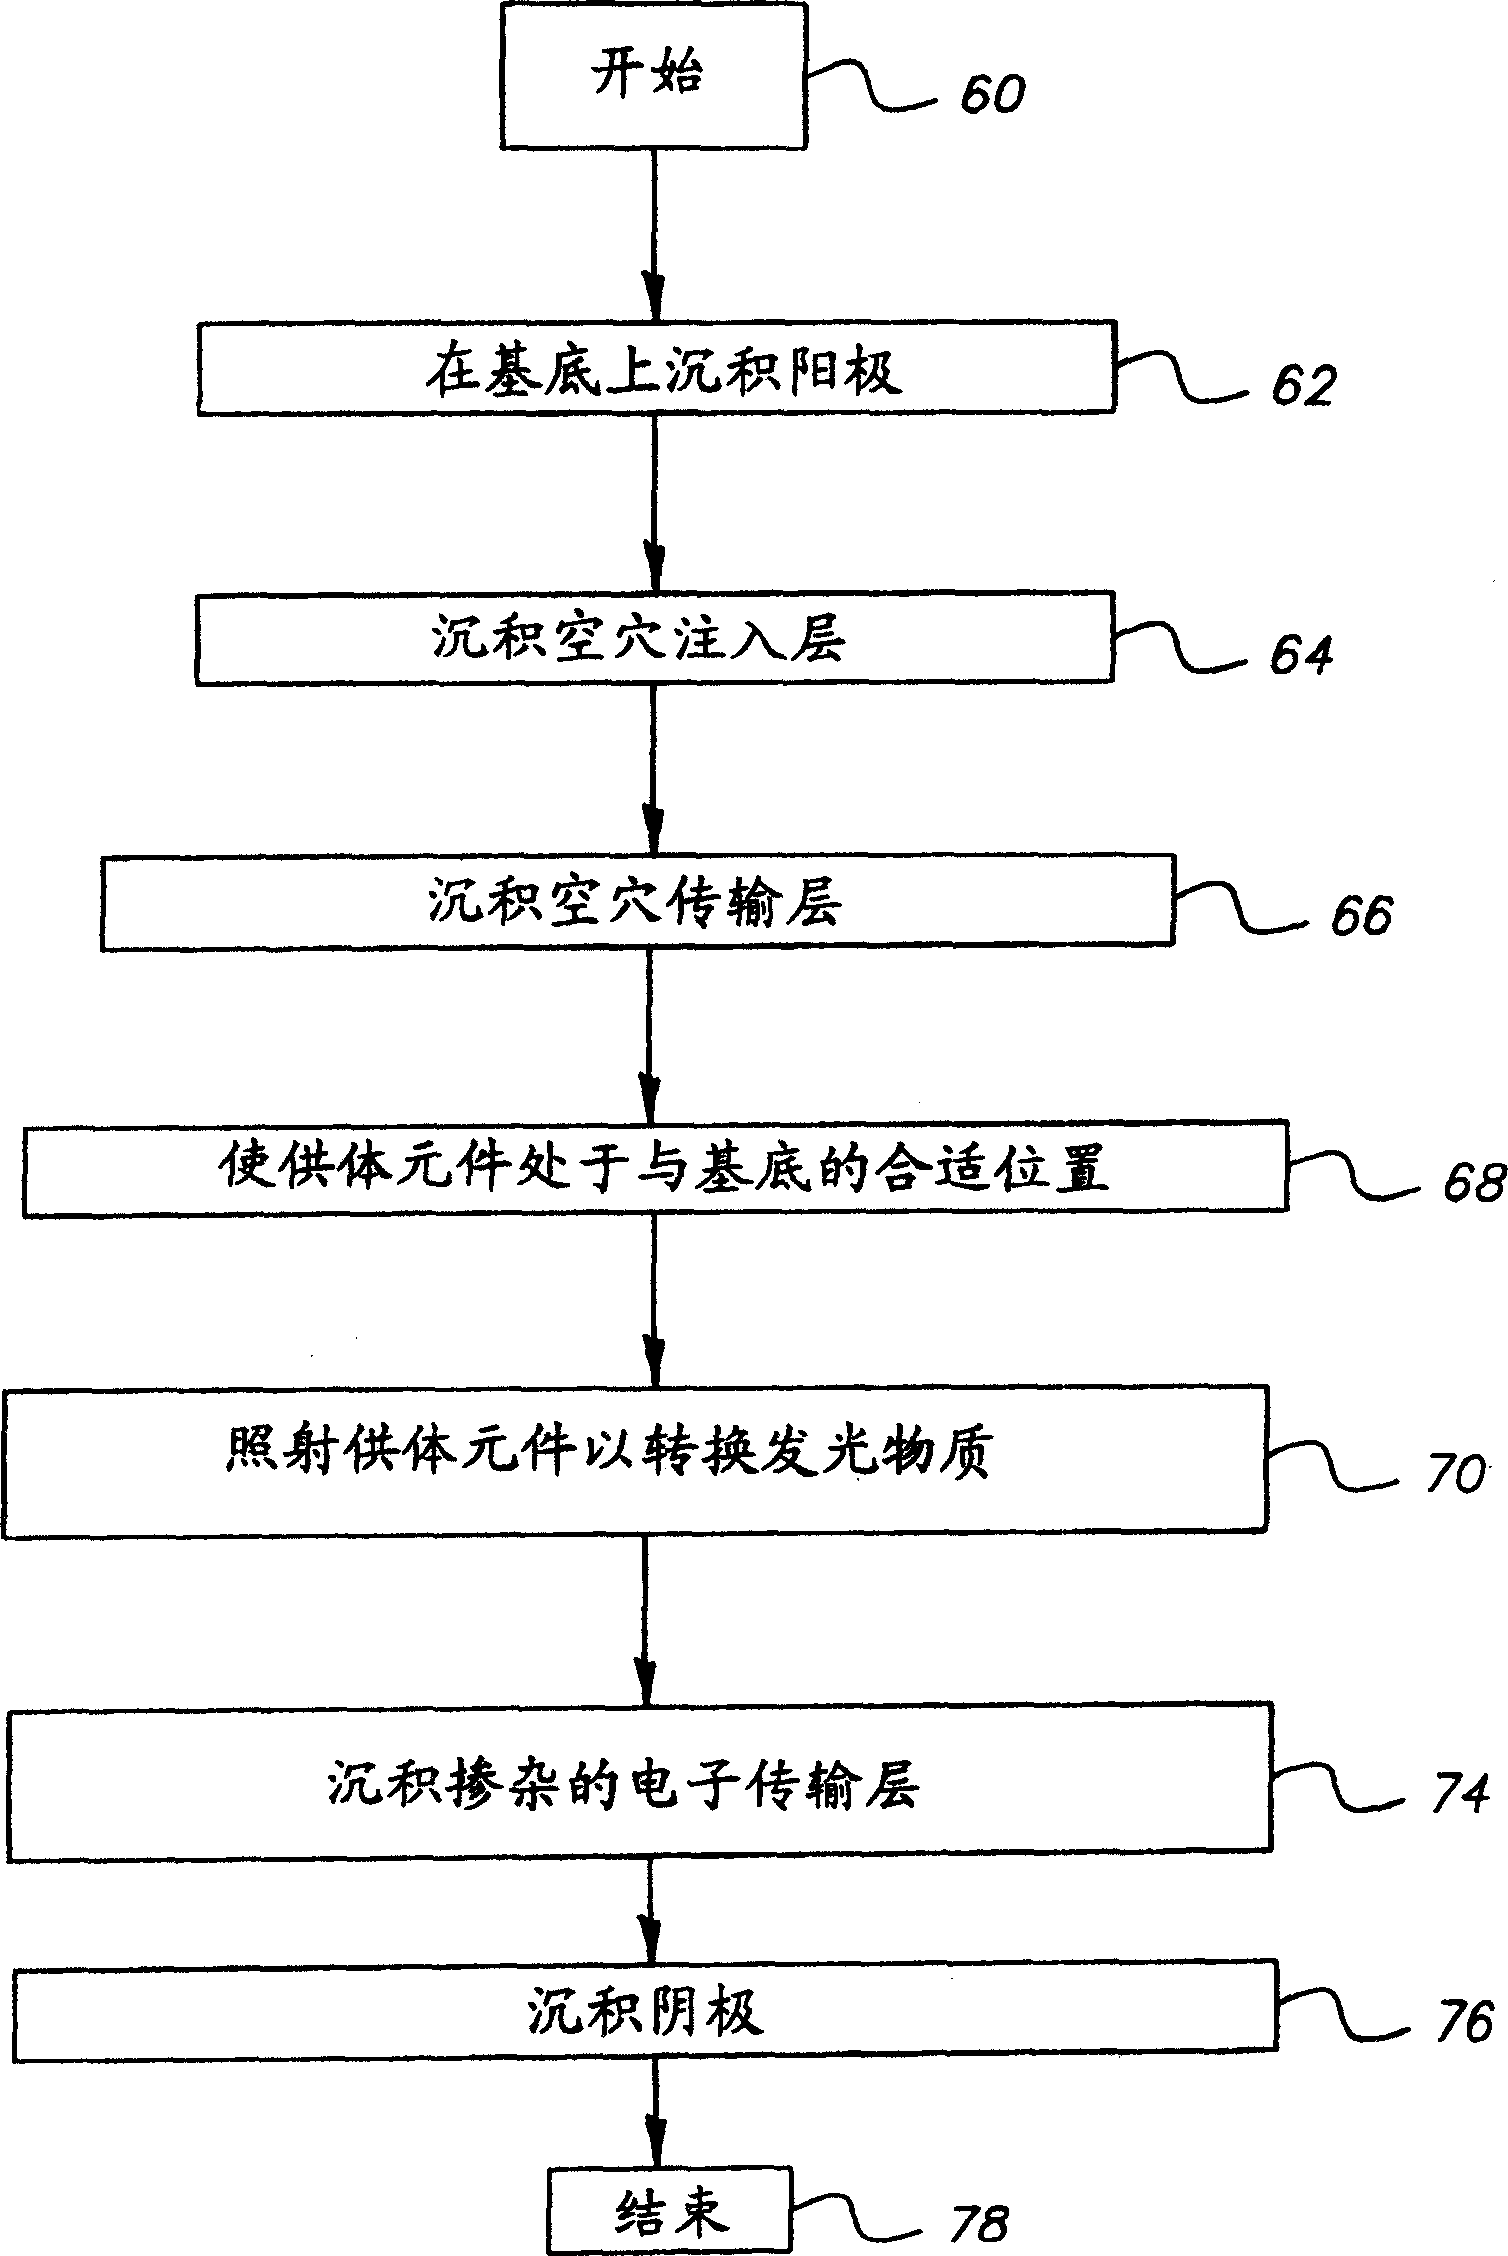 Forming improved stabiity emissive layer from donor element in OLED device